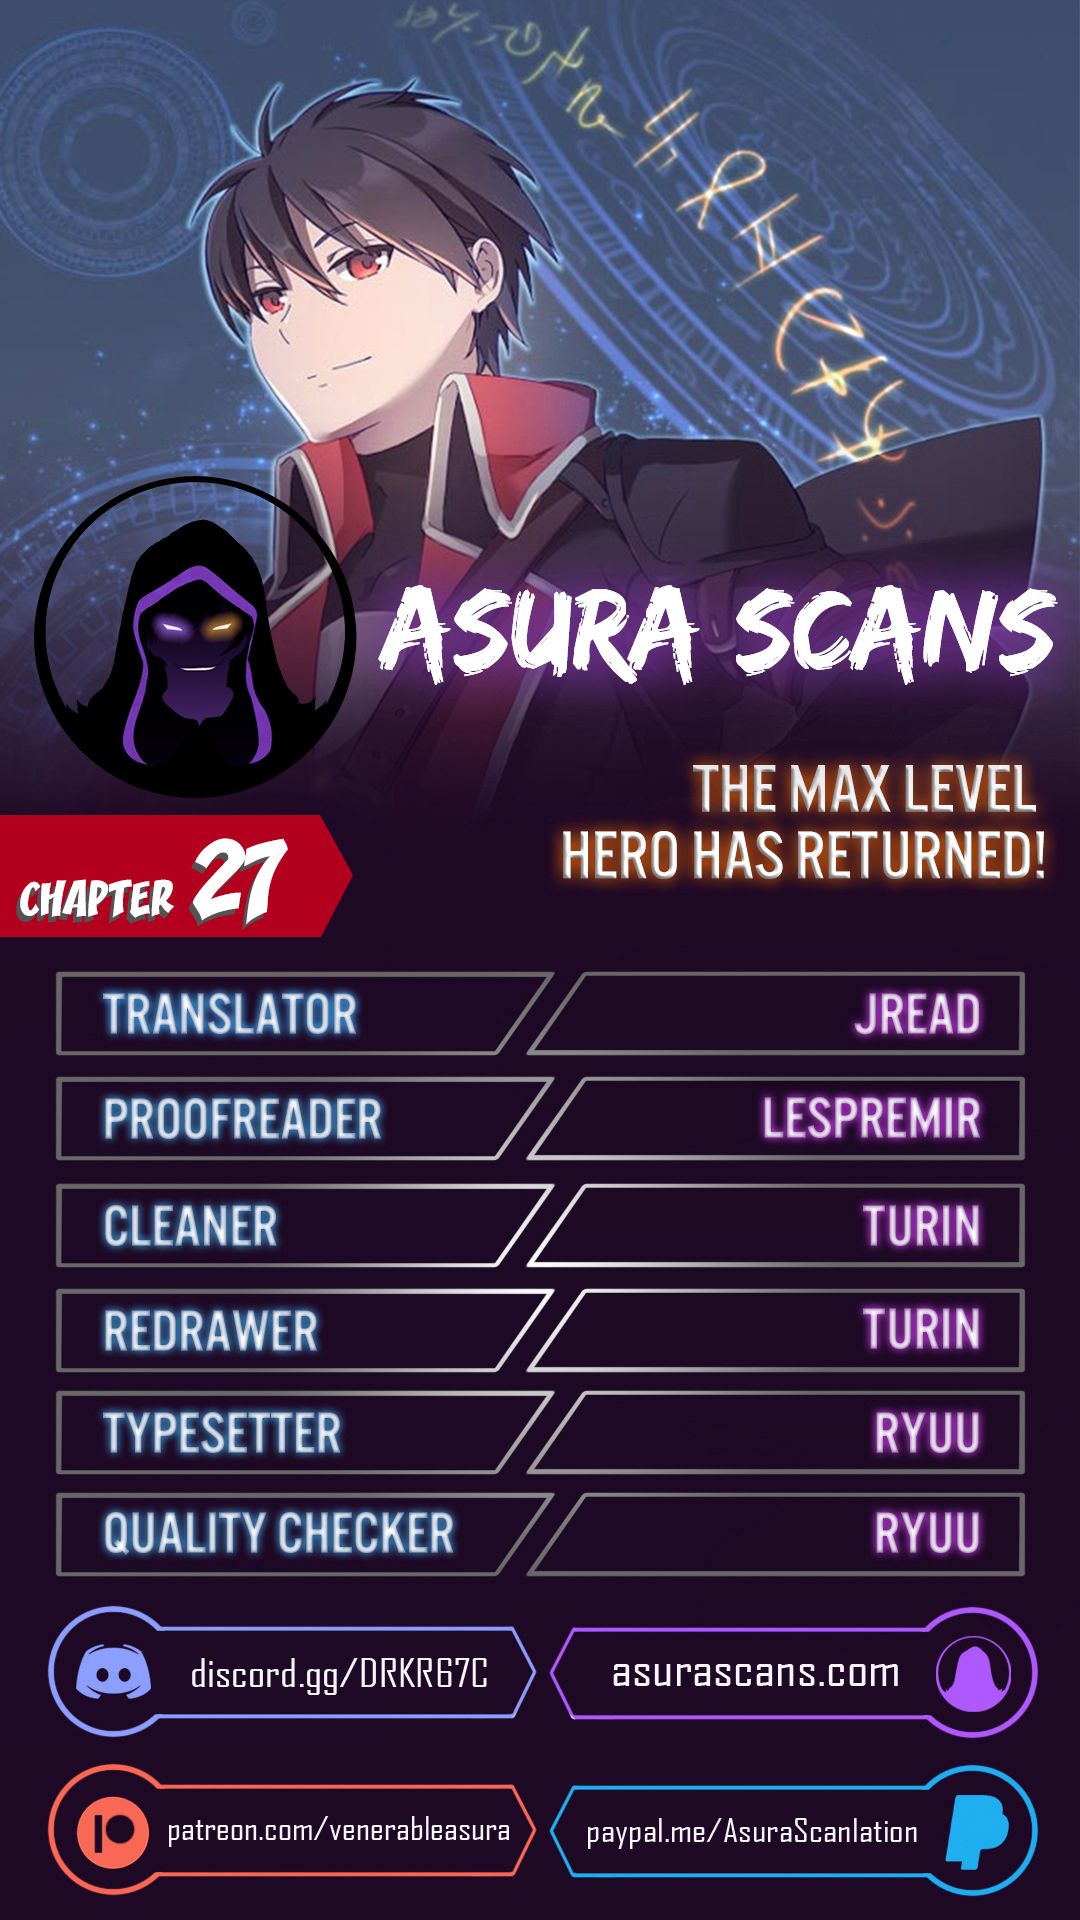 The Max Level Hero has Returned! chapter 27